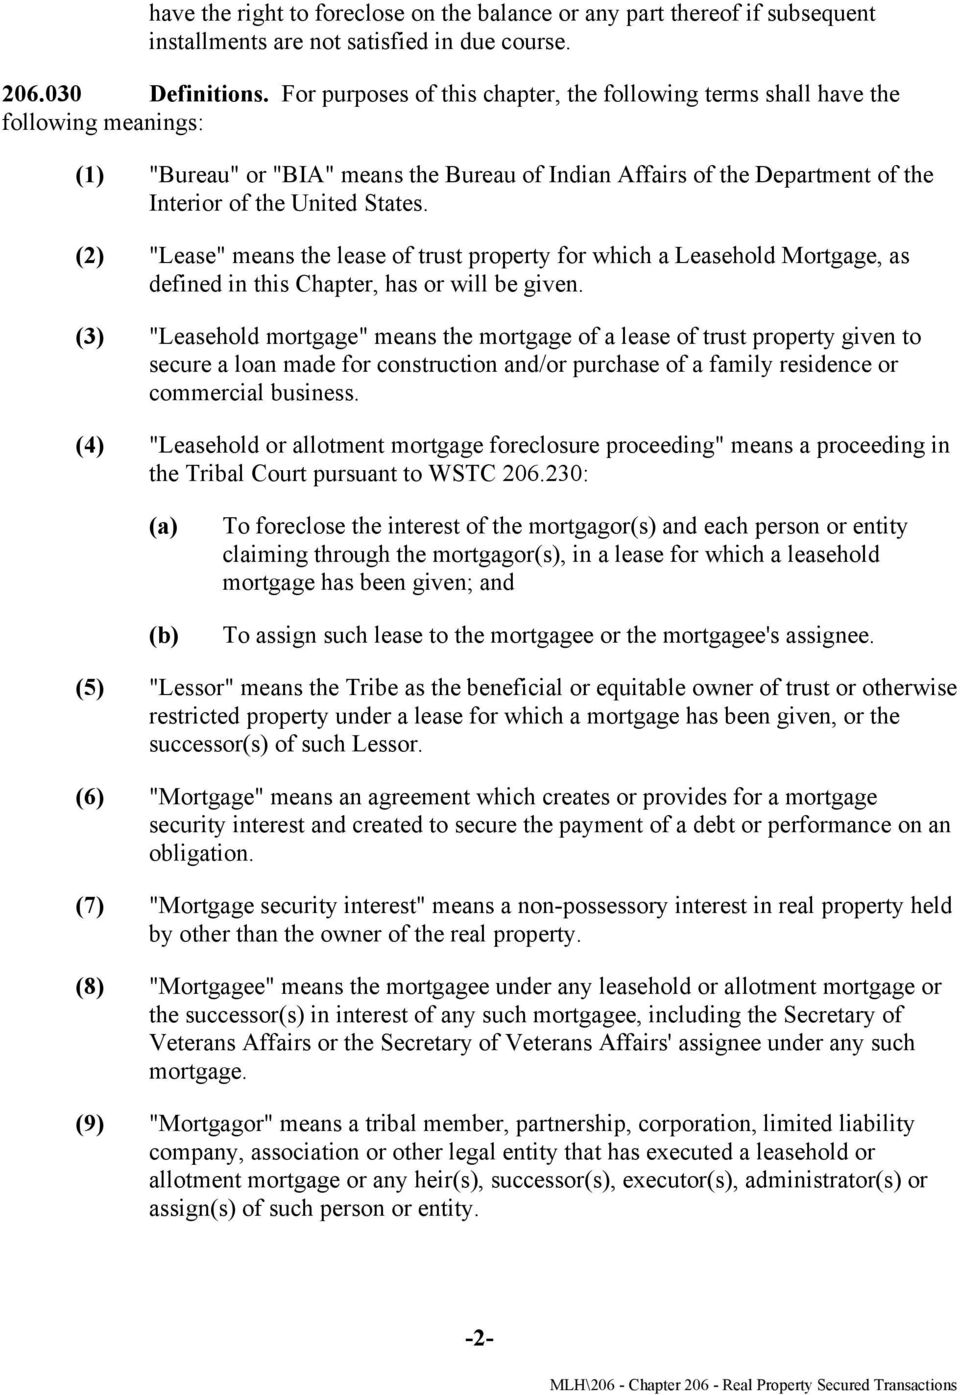 (2) "Lease" means the lease of trust property for which a Leasehold Mortgage, as defined in this Chapter, has or will be given.